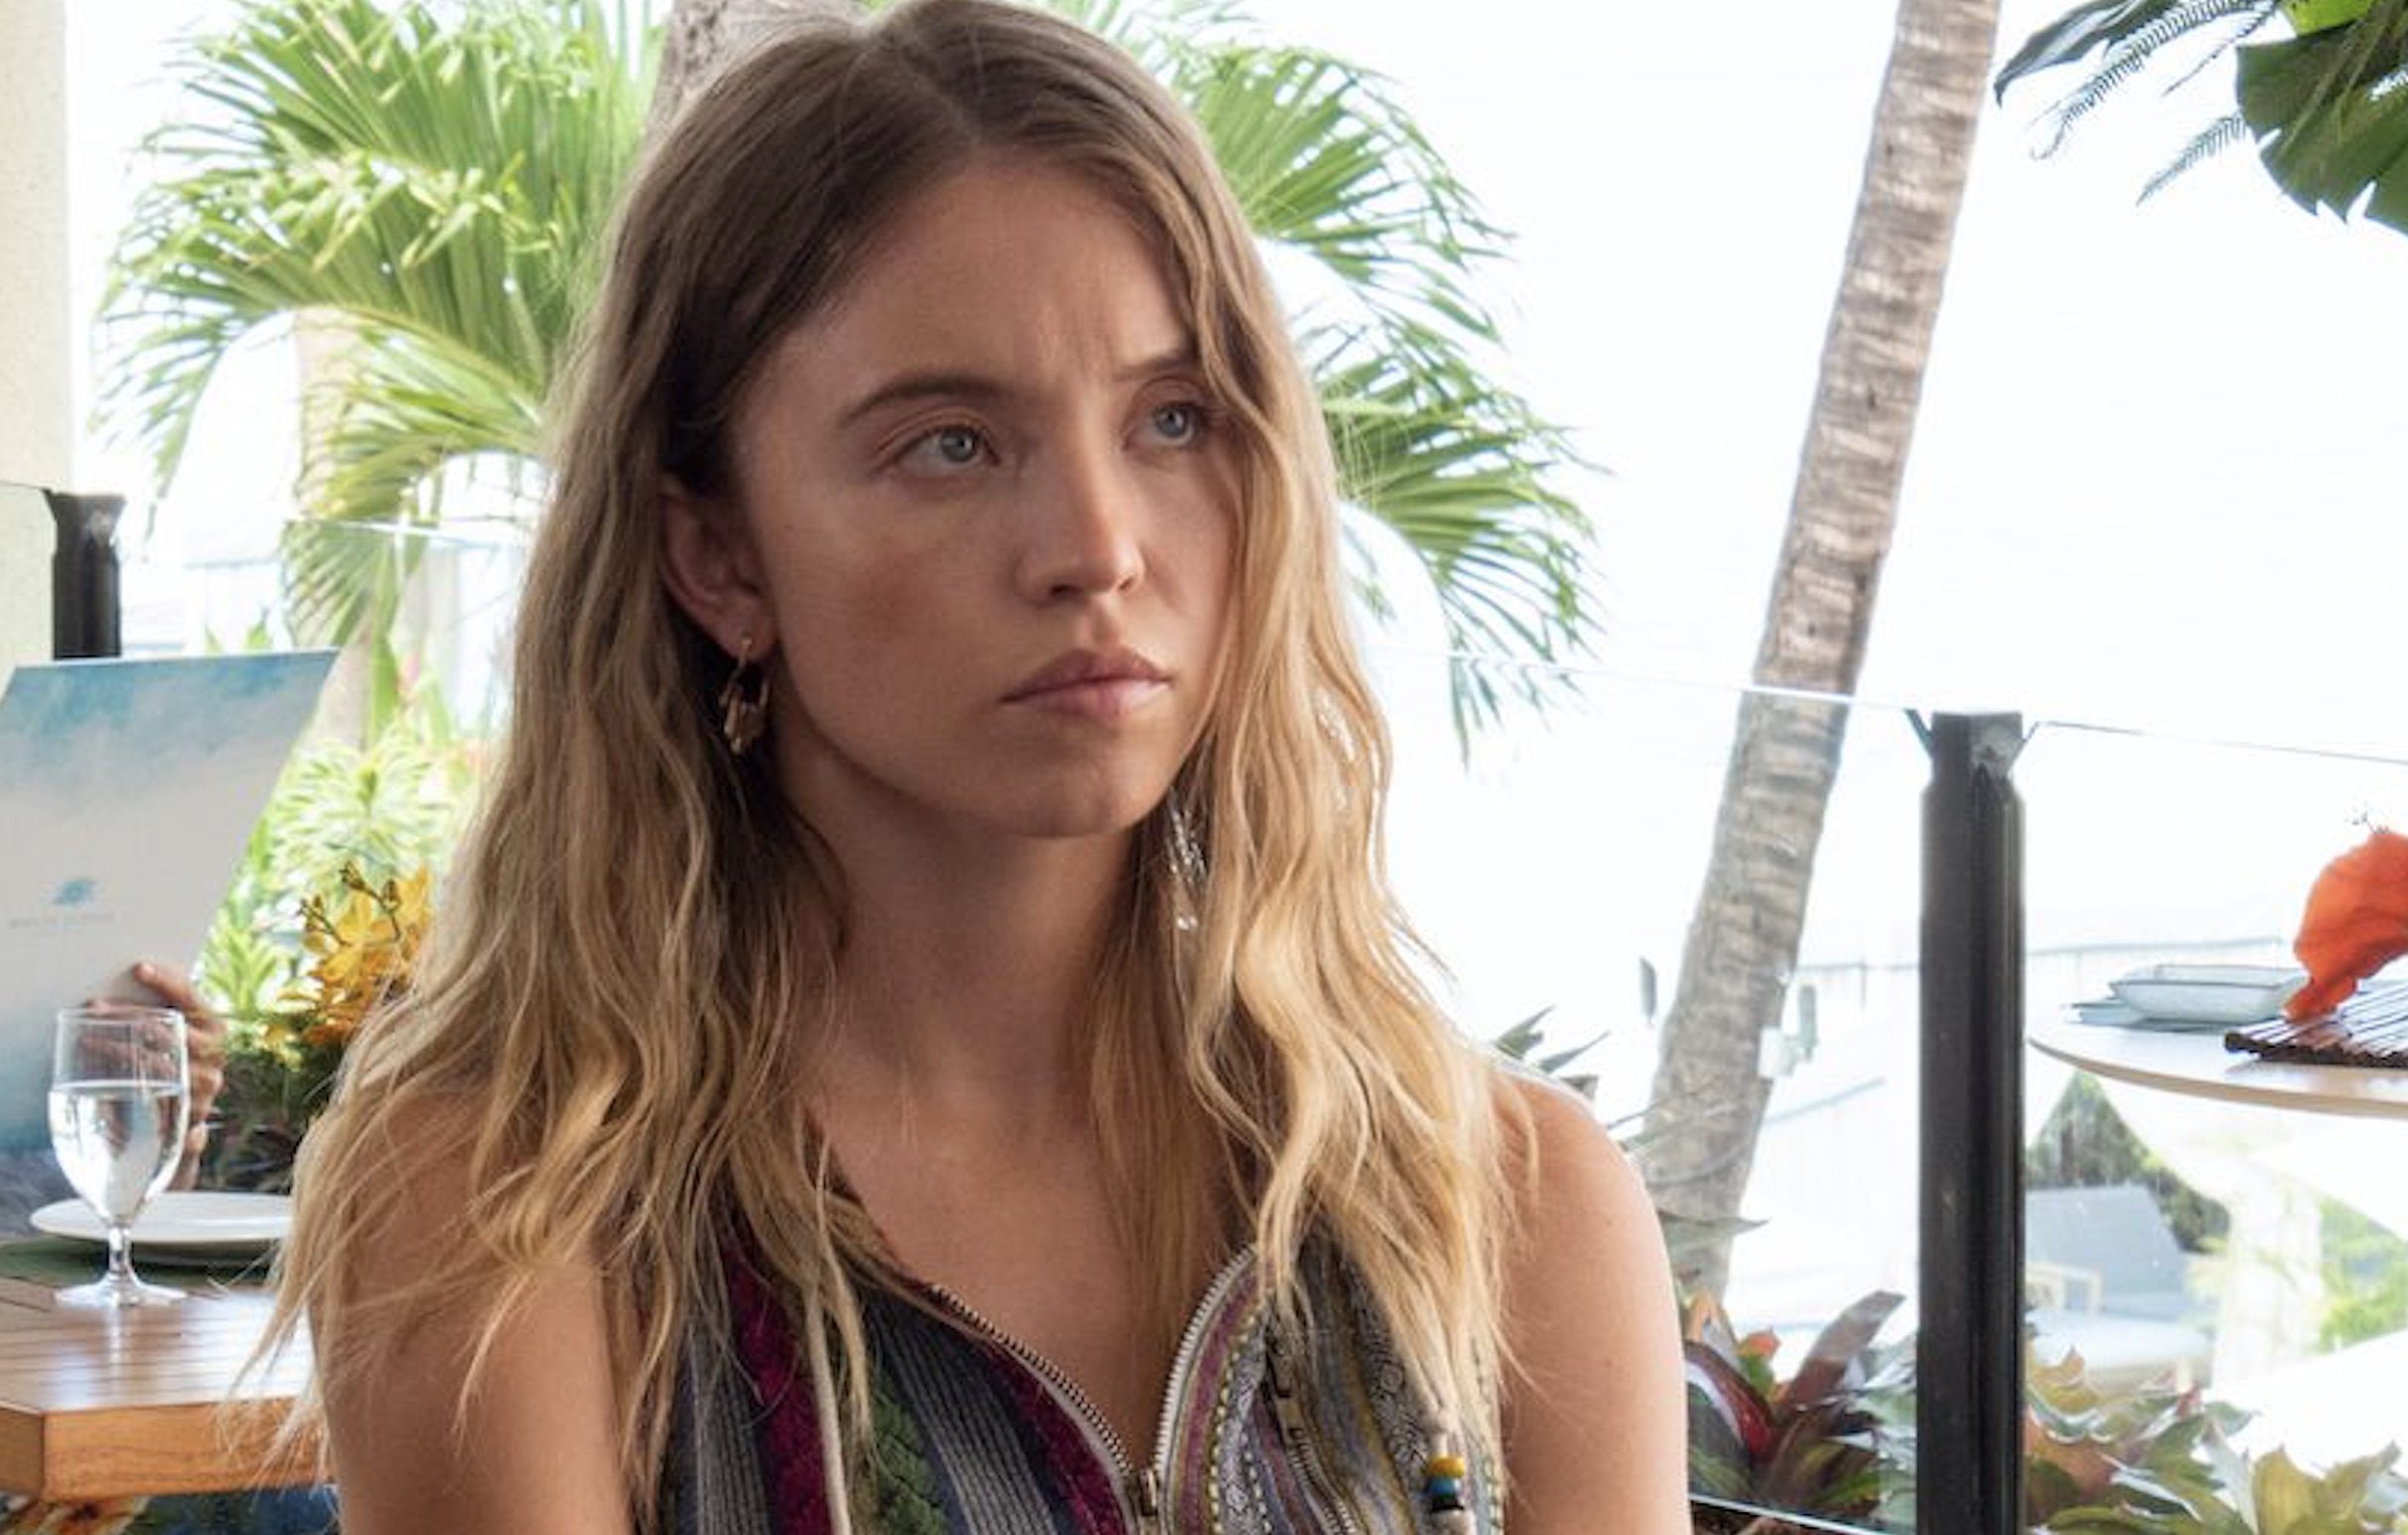 The White Lotus Cast on HBO - Sydney Sweeney as Olivia Mossbacher